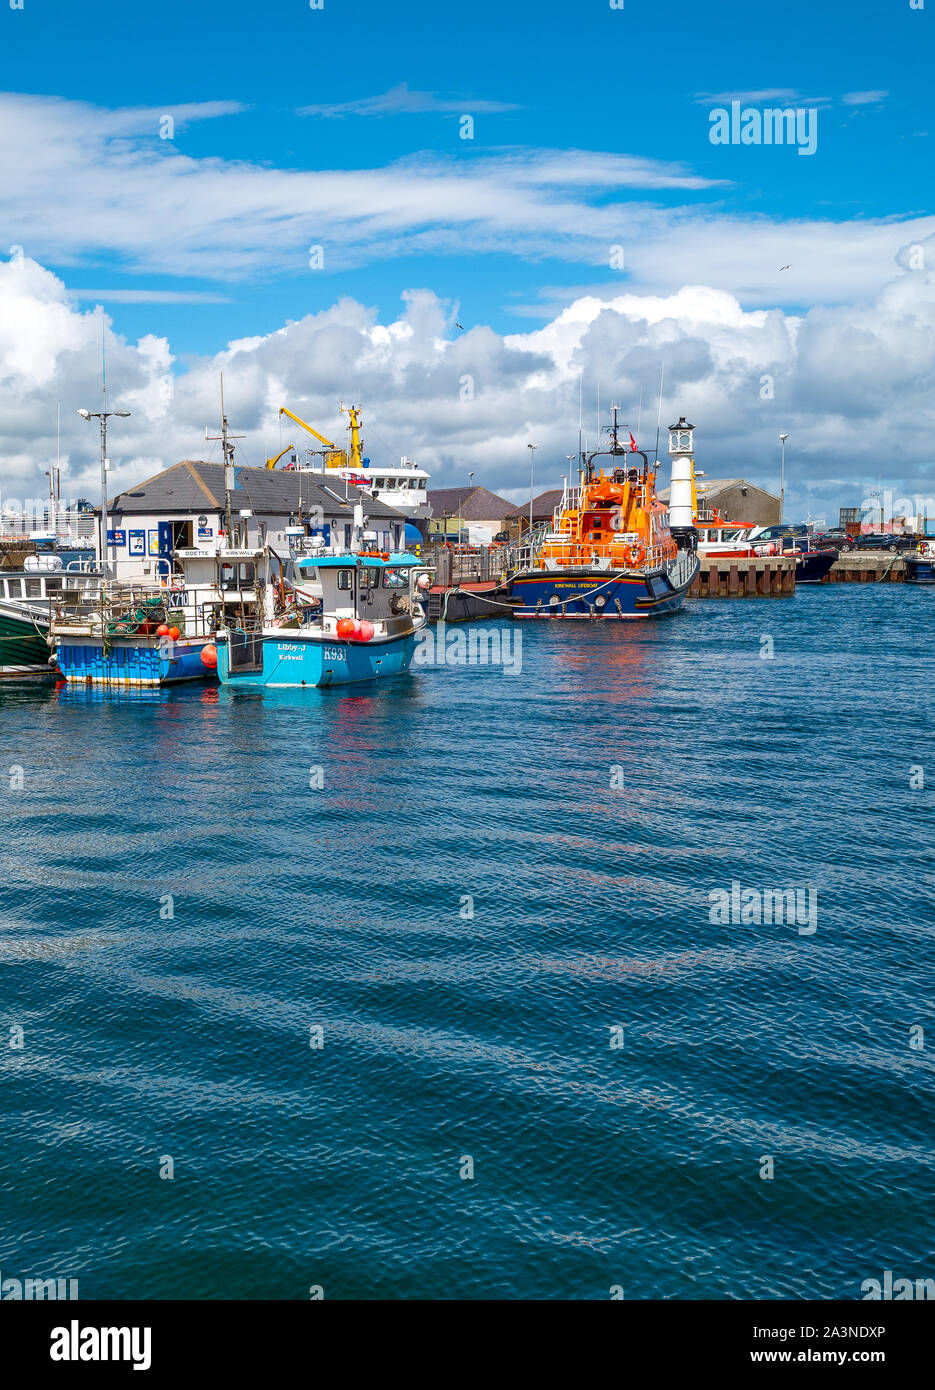 Kirkwall, Orkney, Scoland - June 4, 2019: Fishermen boats in the harbor Stock Photo